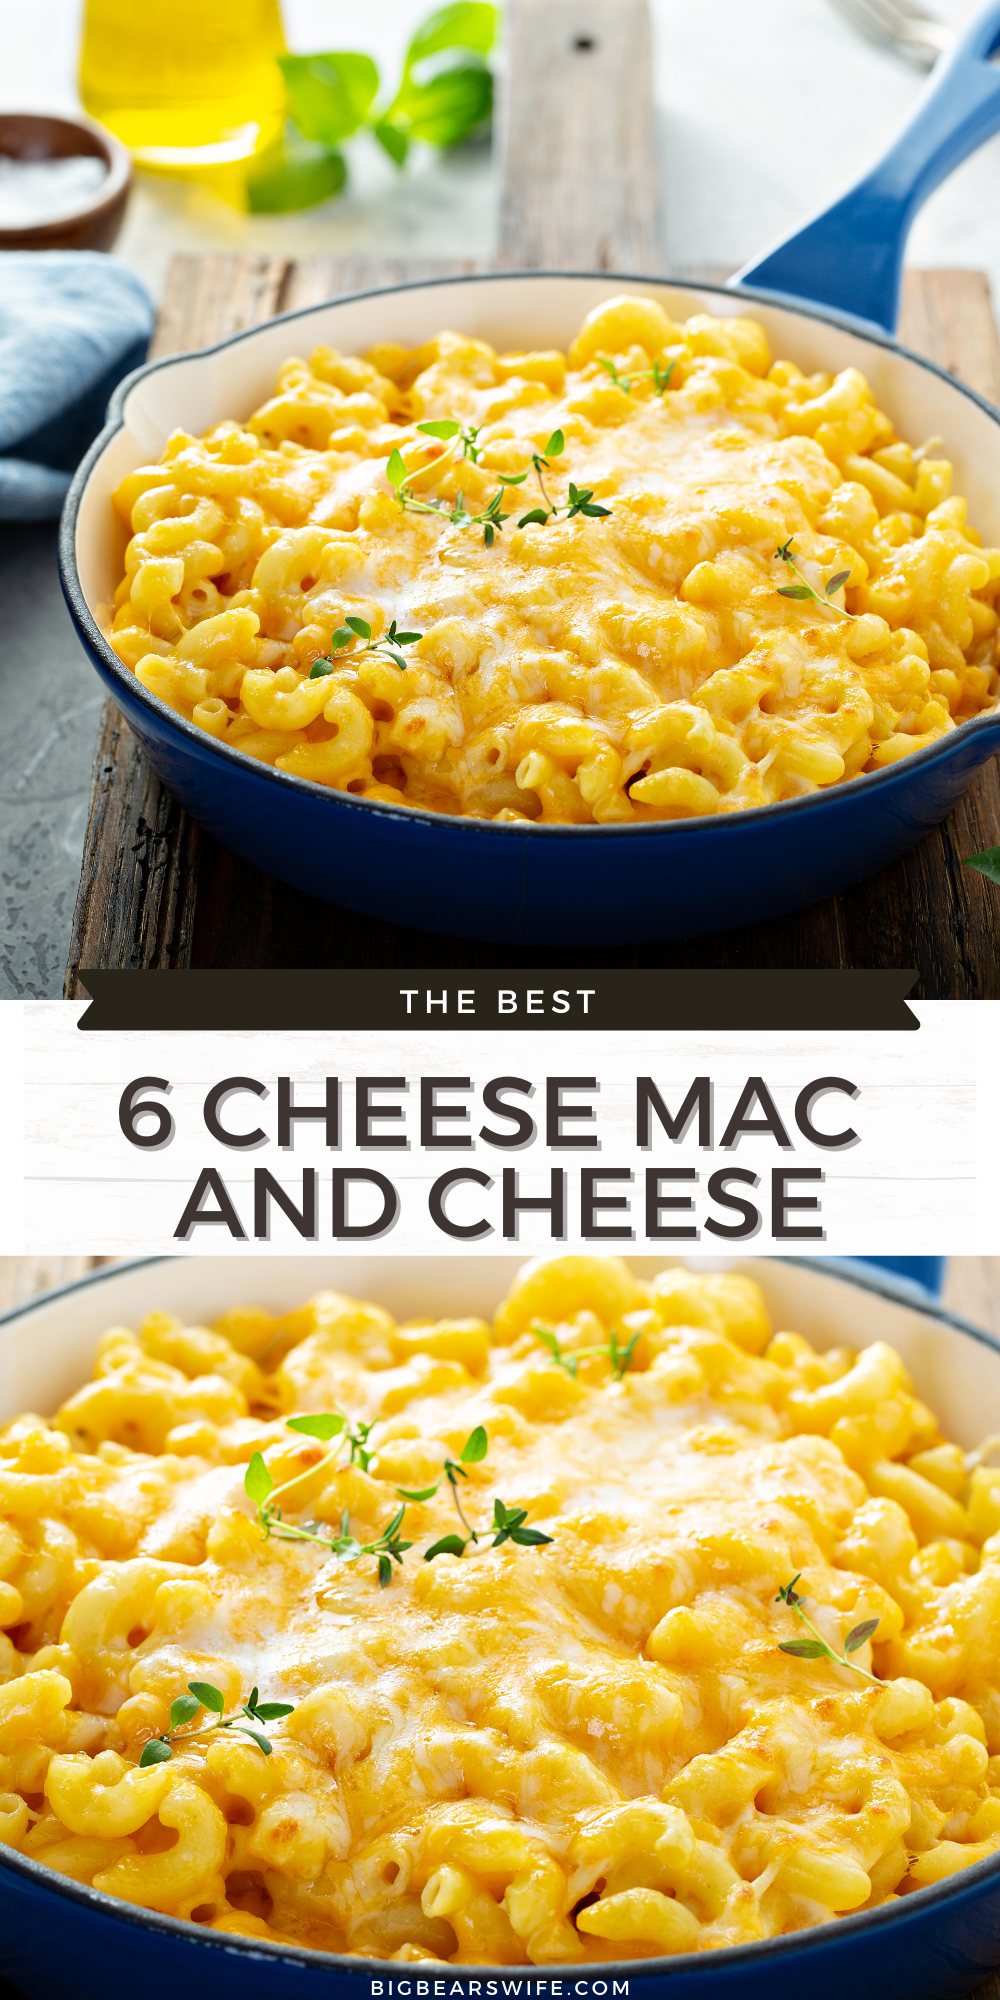 This 6 Cheese Mac and cheese recipe is the he Ultimate Lady's Cheesy Mac and Cheese from Mrs. Paula Deen! I made it for the first Thanksgiving we had after we moved back to Virginia and it was a hit! via @bigbearswife